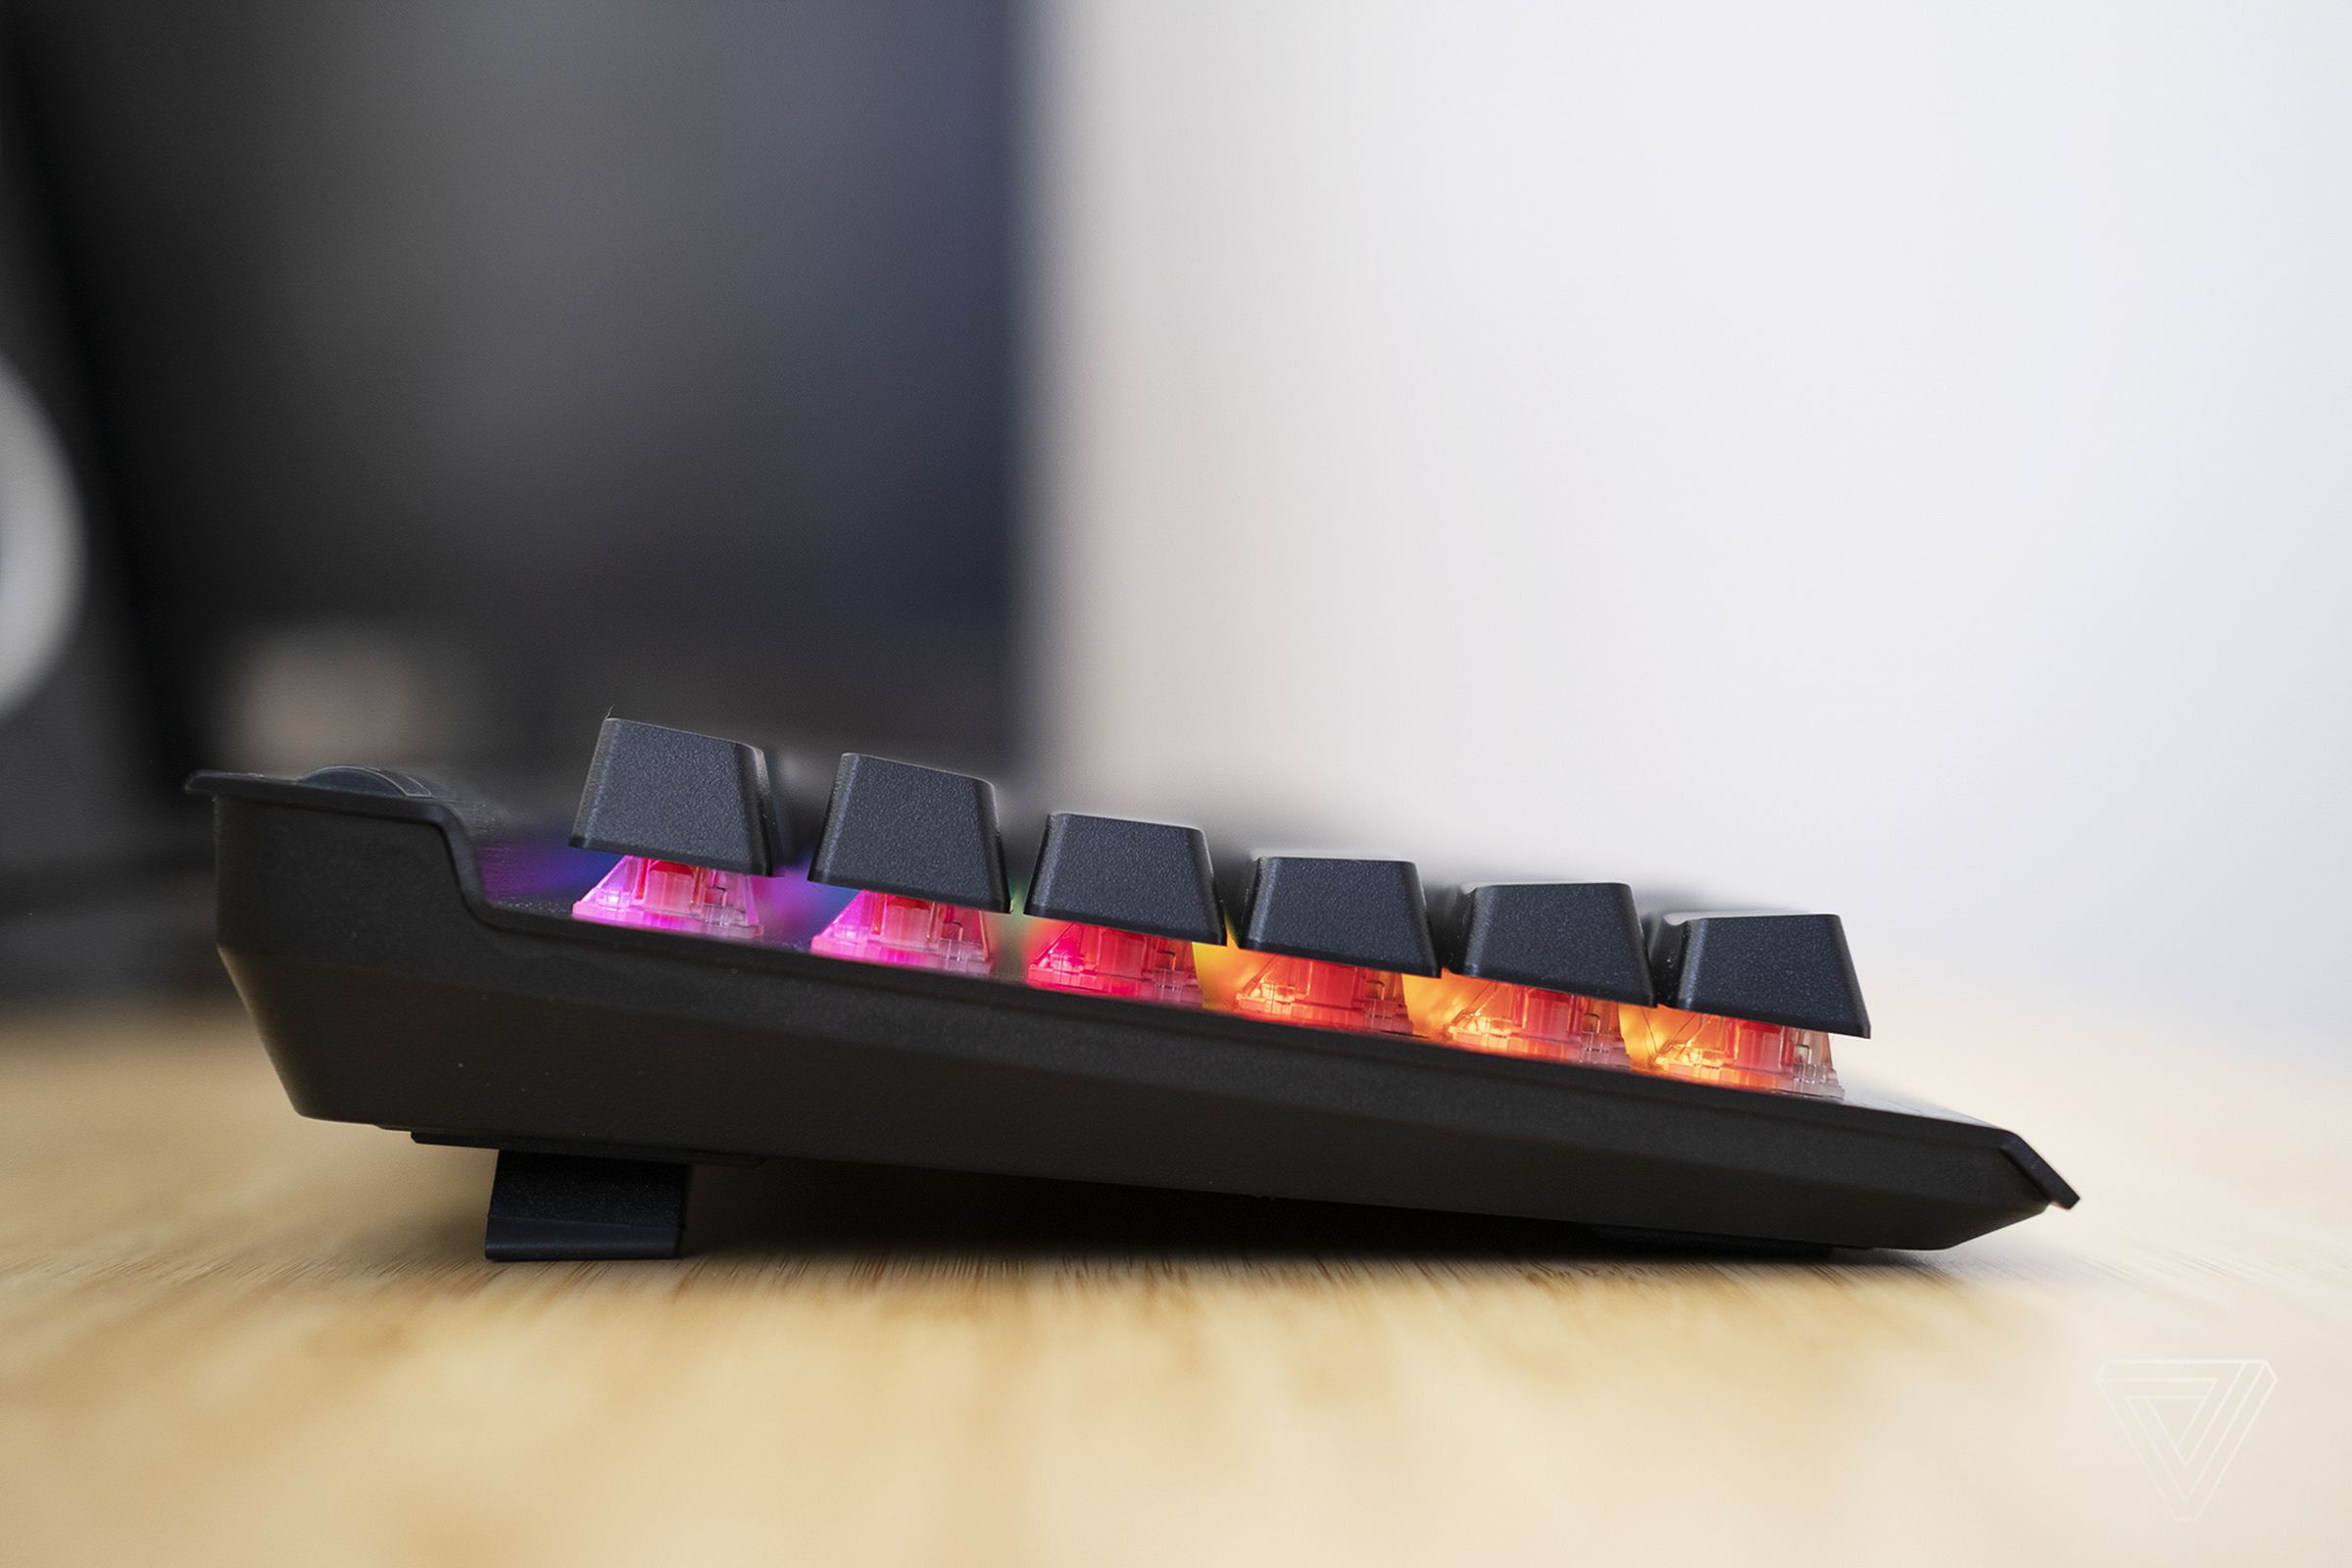 You can control its lighting directly from the keyboard itself or via companion software.